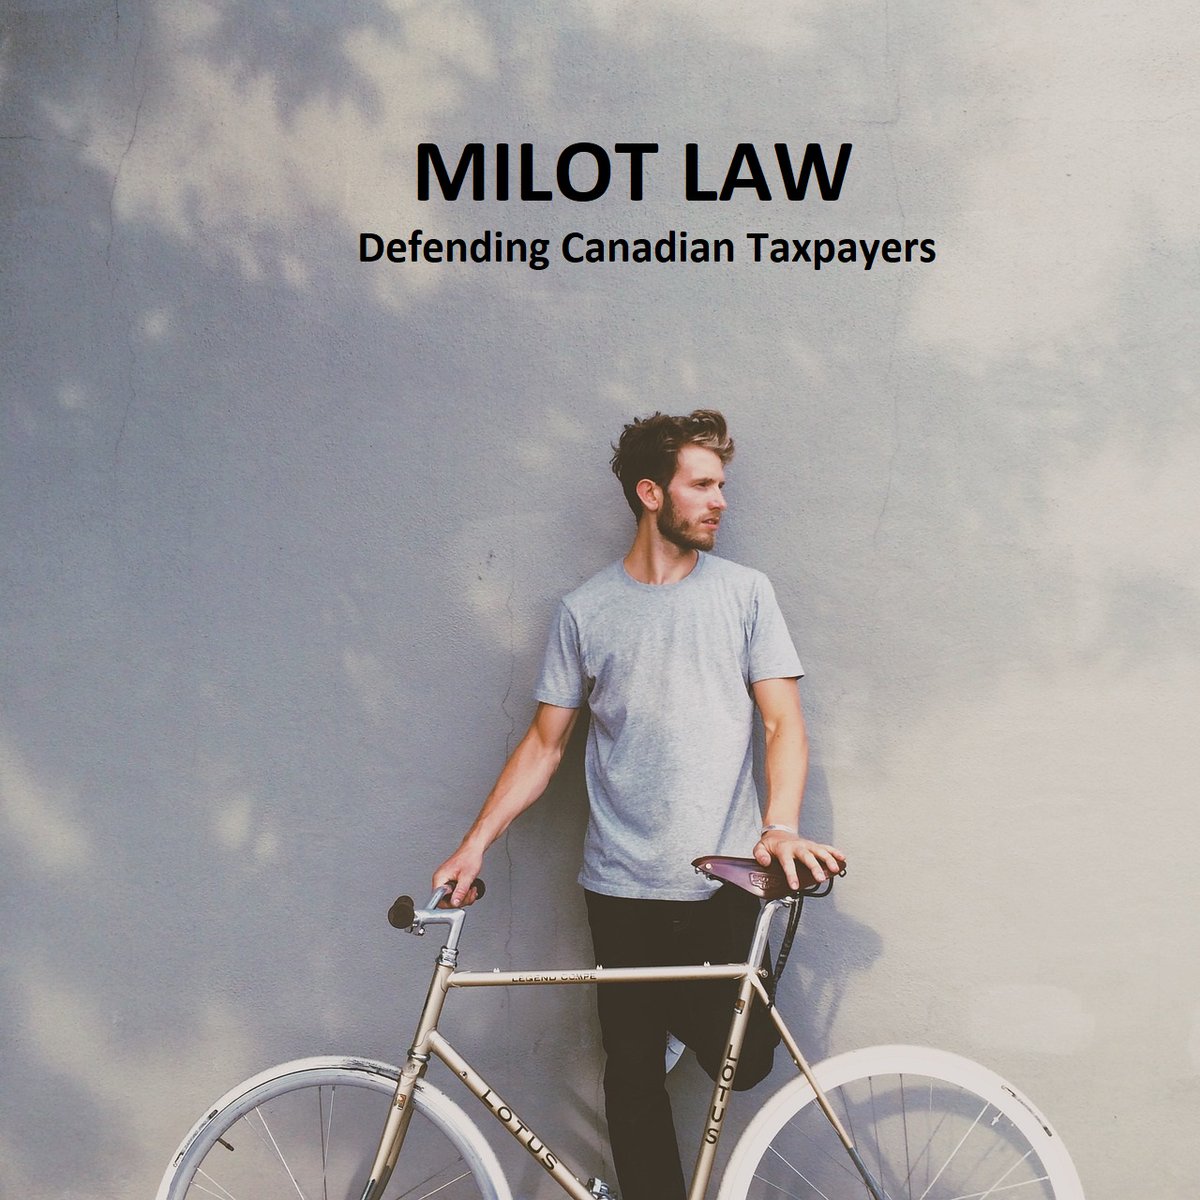 Tax Lawyers, MILOT LAW. Defending Canadian Taxpayers with CRA Tax Re-Assessment issues. Trusted Tax Dispute Advice. Call Us
416-601-1002
MilotLaw.ca
or ask Alexa Google or Hey Siri to find a Tax Lawyer in Toronto
#TaxLawyer #CRA #MilotLaw #TaxLawTO #TaxLawCA